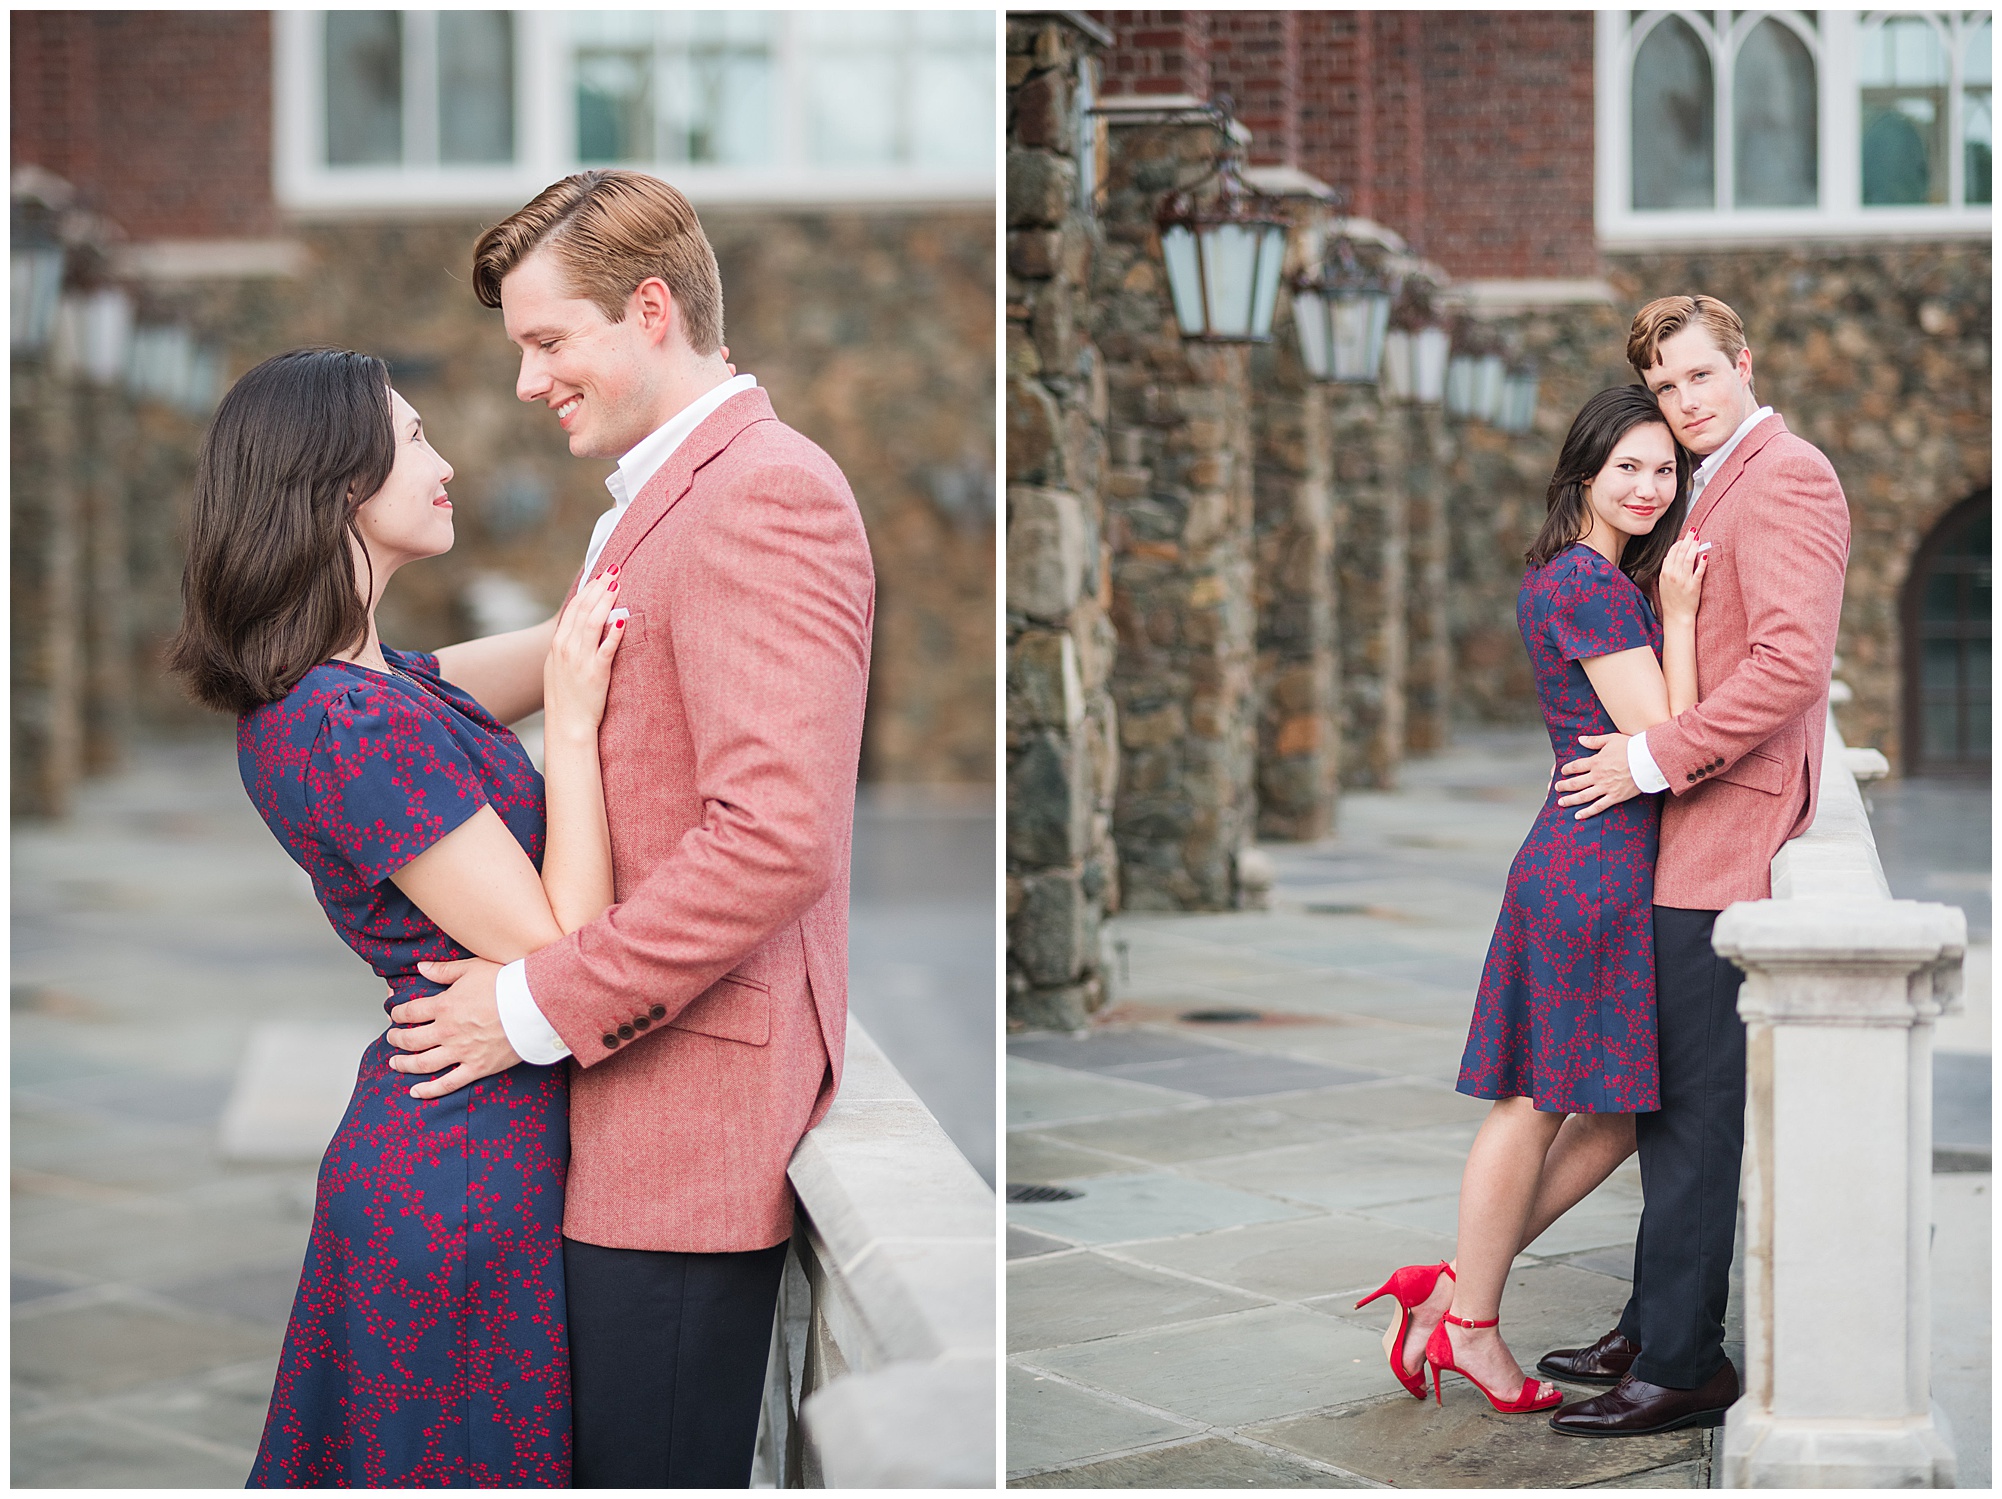 dover hall estate engagement photos in august in the summer outdoors. historic wedding venue in rva richmond virginia